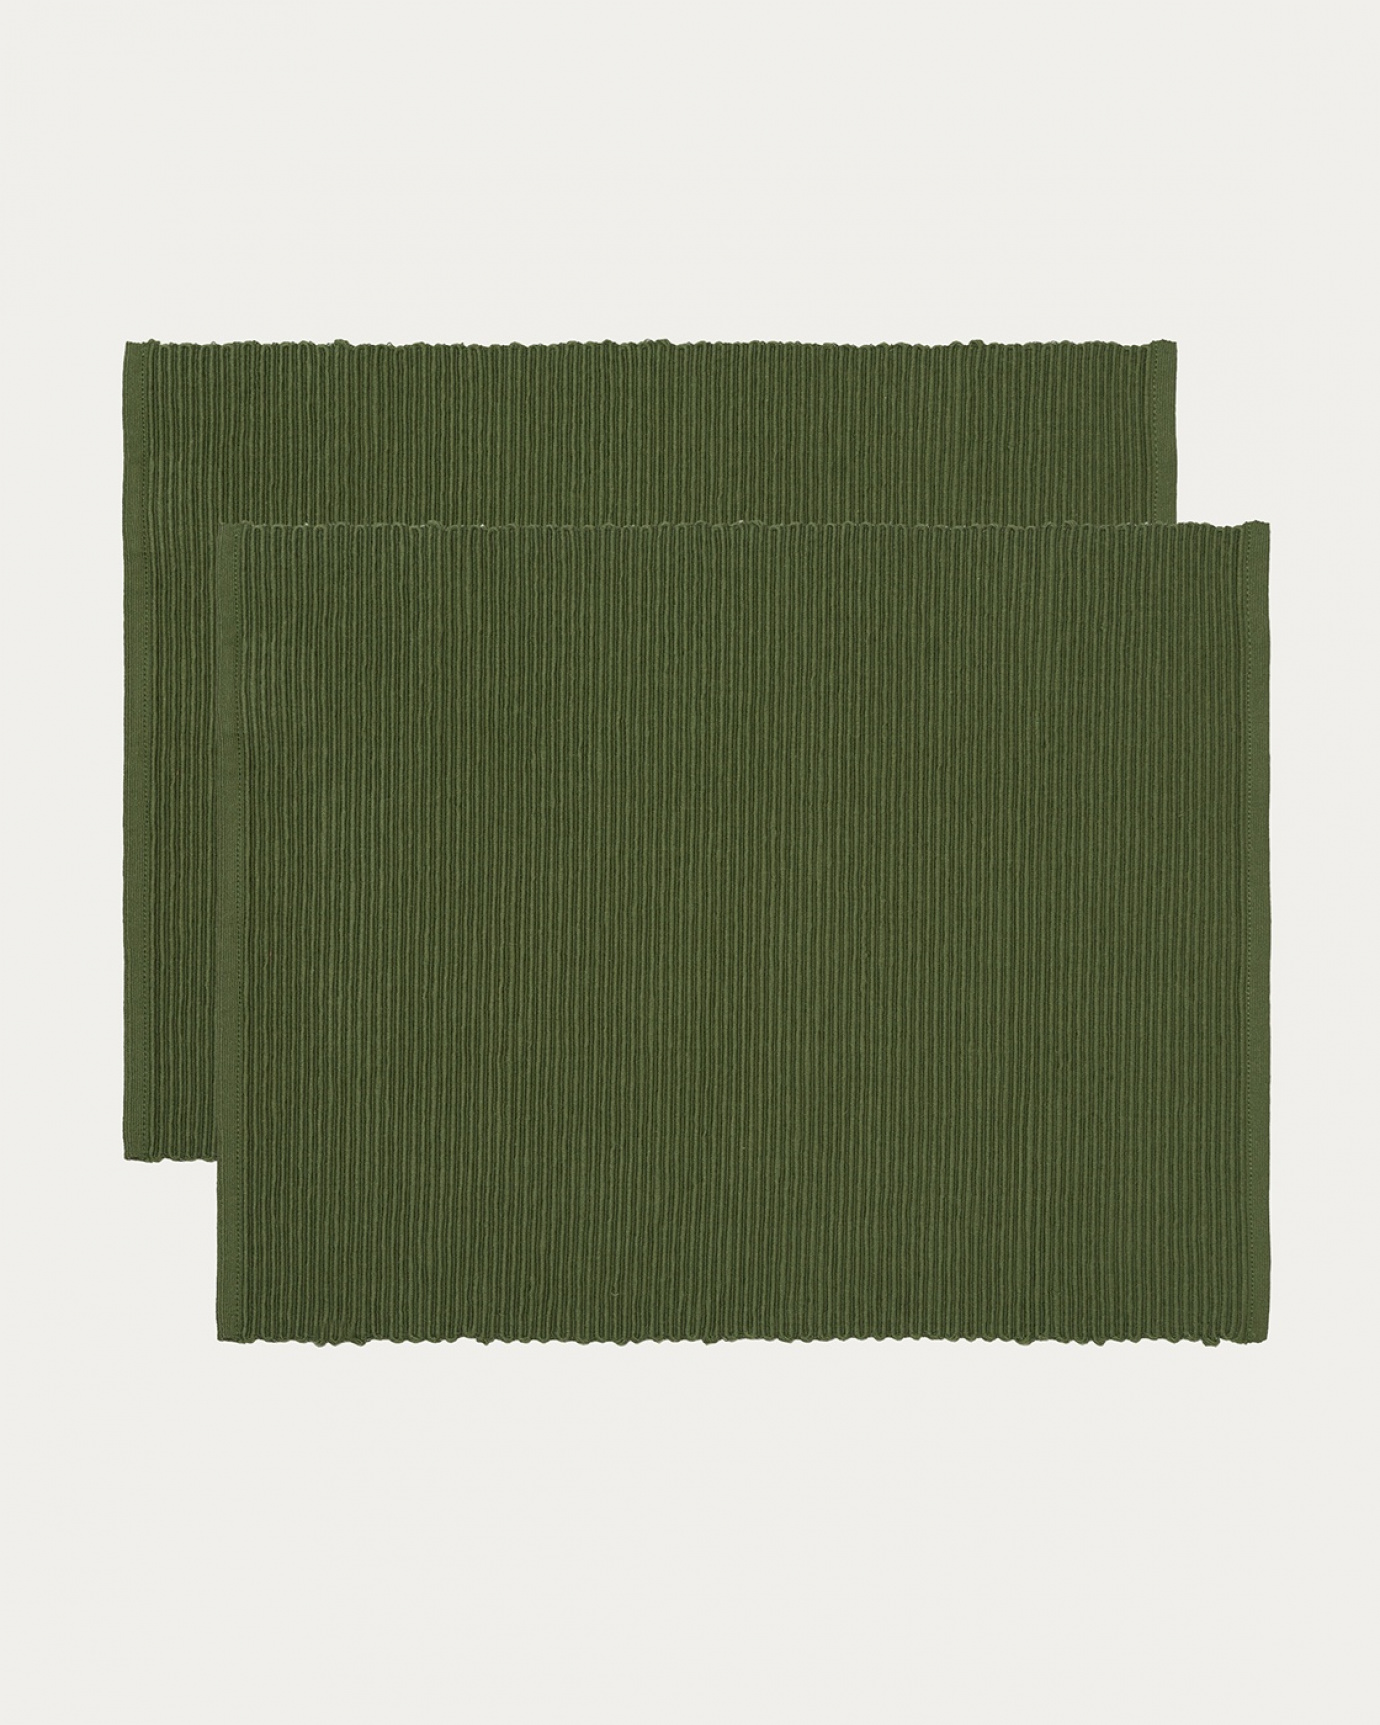 Product image dark olive green UNI placemat made of soft cotton in ribbed quality from LINUM DESIGN. Size 35x46 cm and sold in 2-pack.